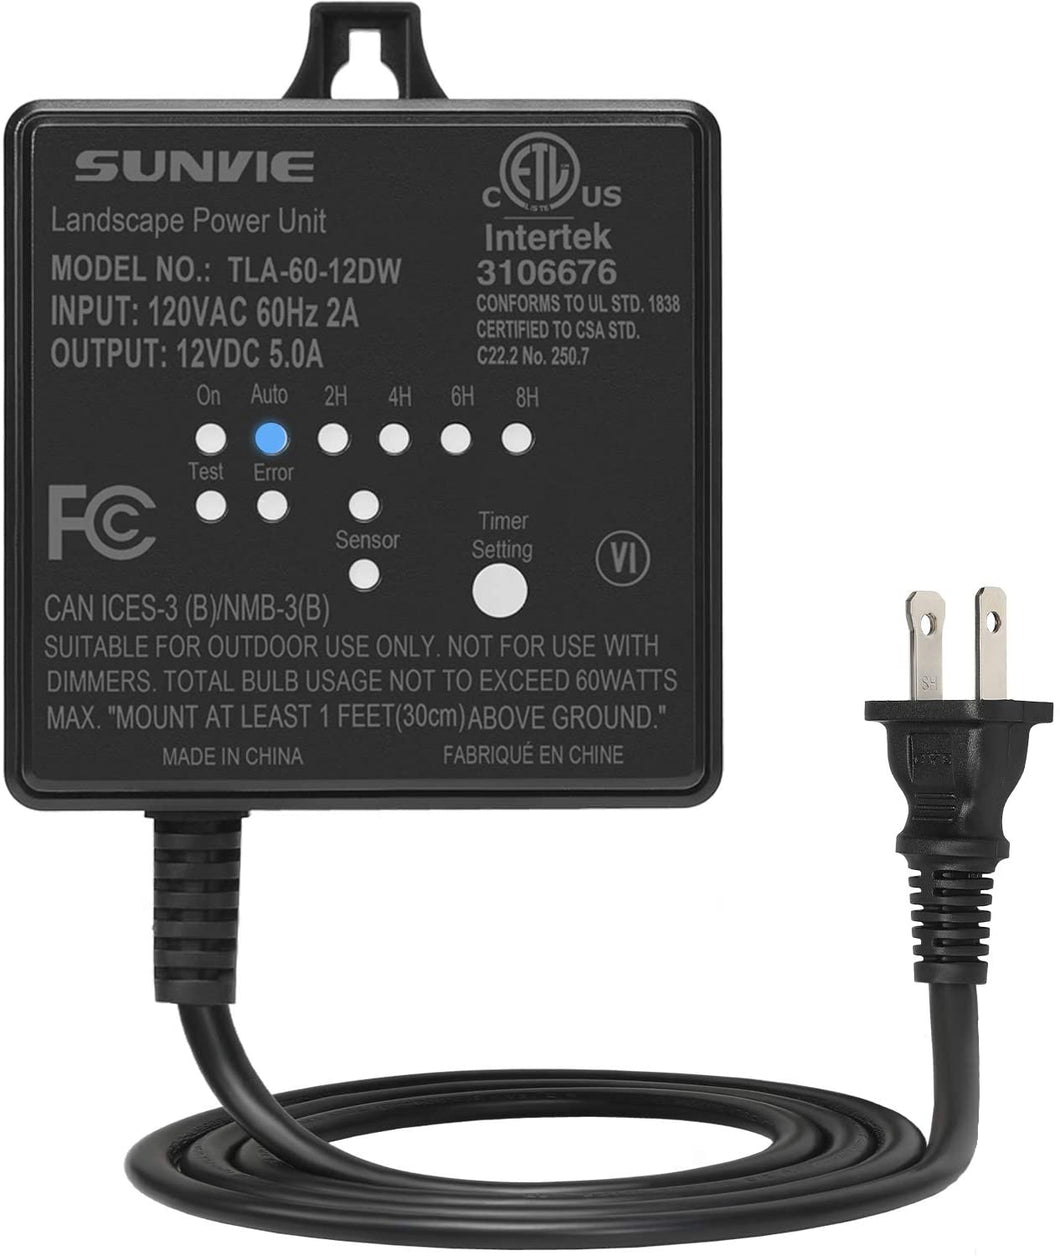 SUNVIE Low Voltage Transformer 60W Landscape Lighting Power Supply with Photocell Sensor and Timer for Outdoor Spotlight Floodlight Garden Pathway Path Lights 120V AC to 12V DC (ETL Listed)